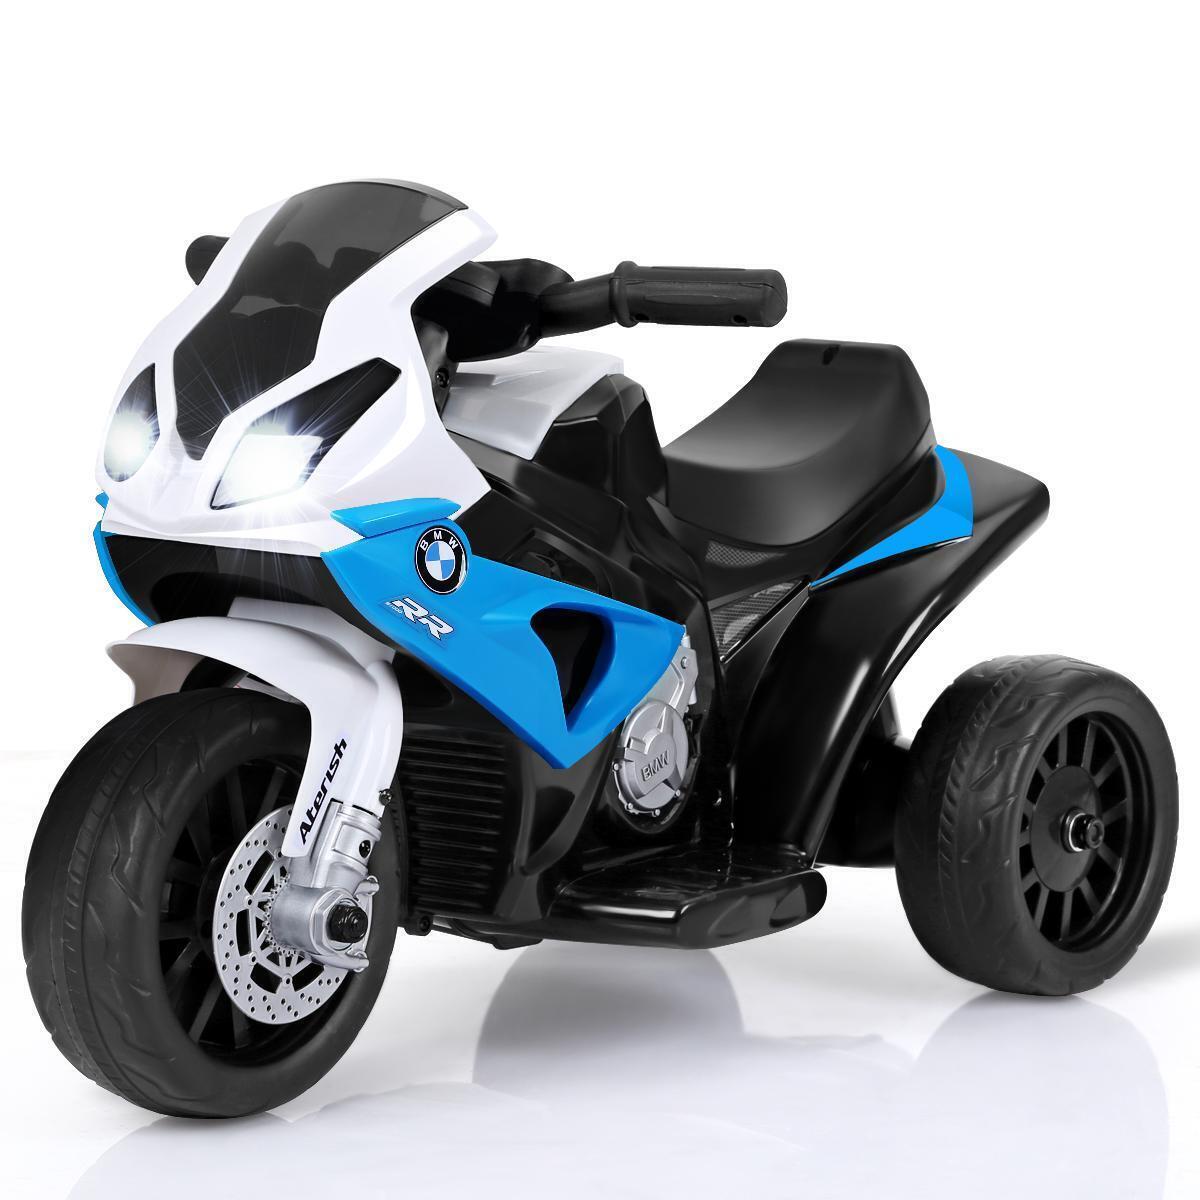 Costway Kids Ride On Motorcycle 6V Battery Powered Electric Toy 3 Wheels